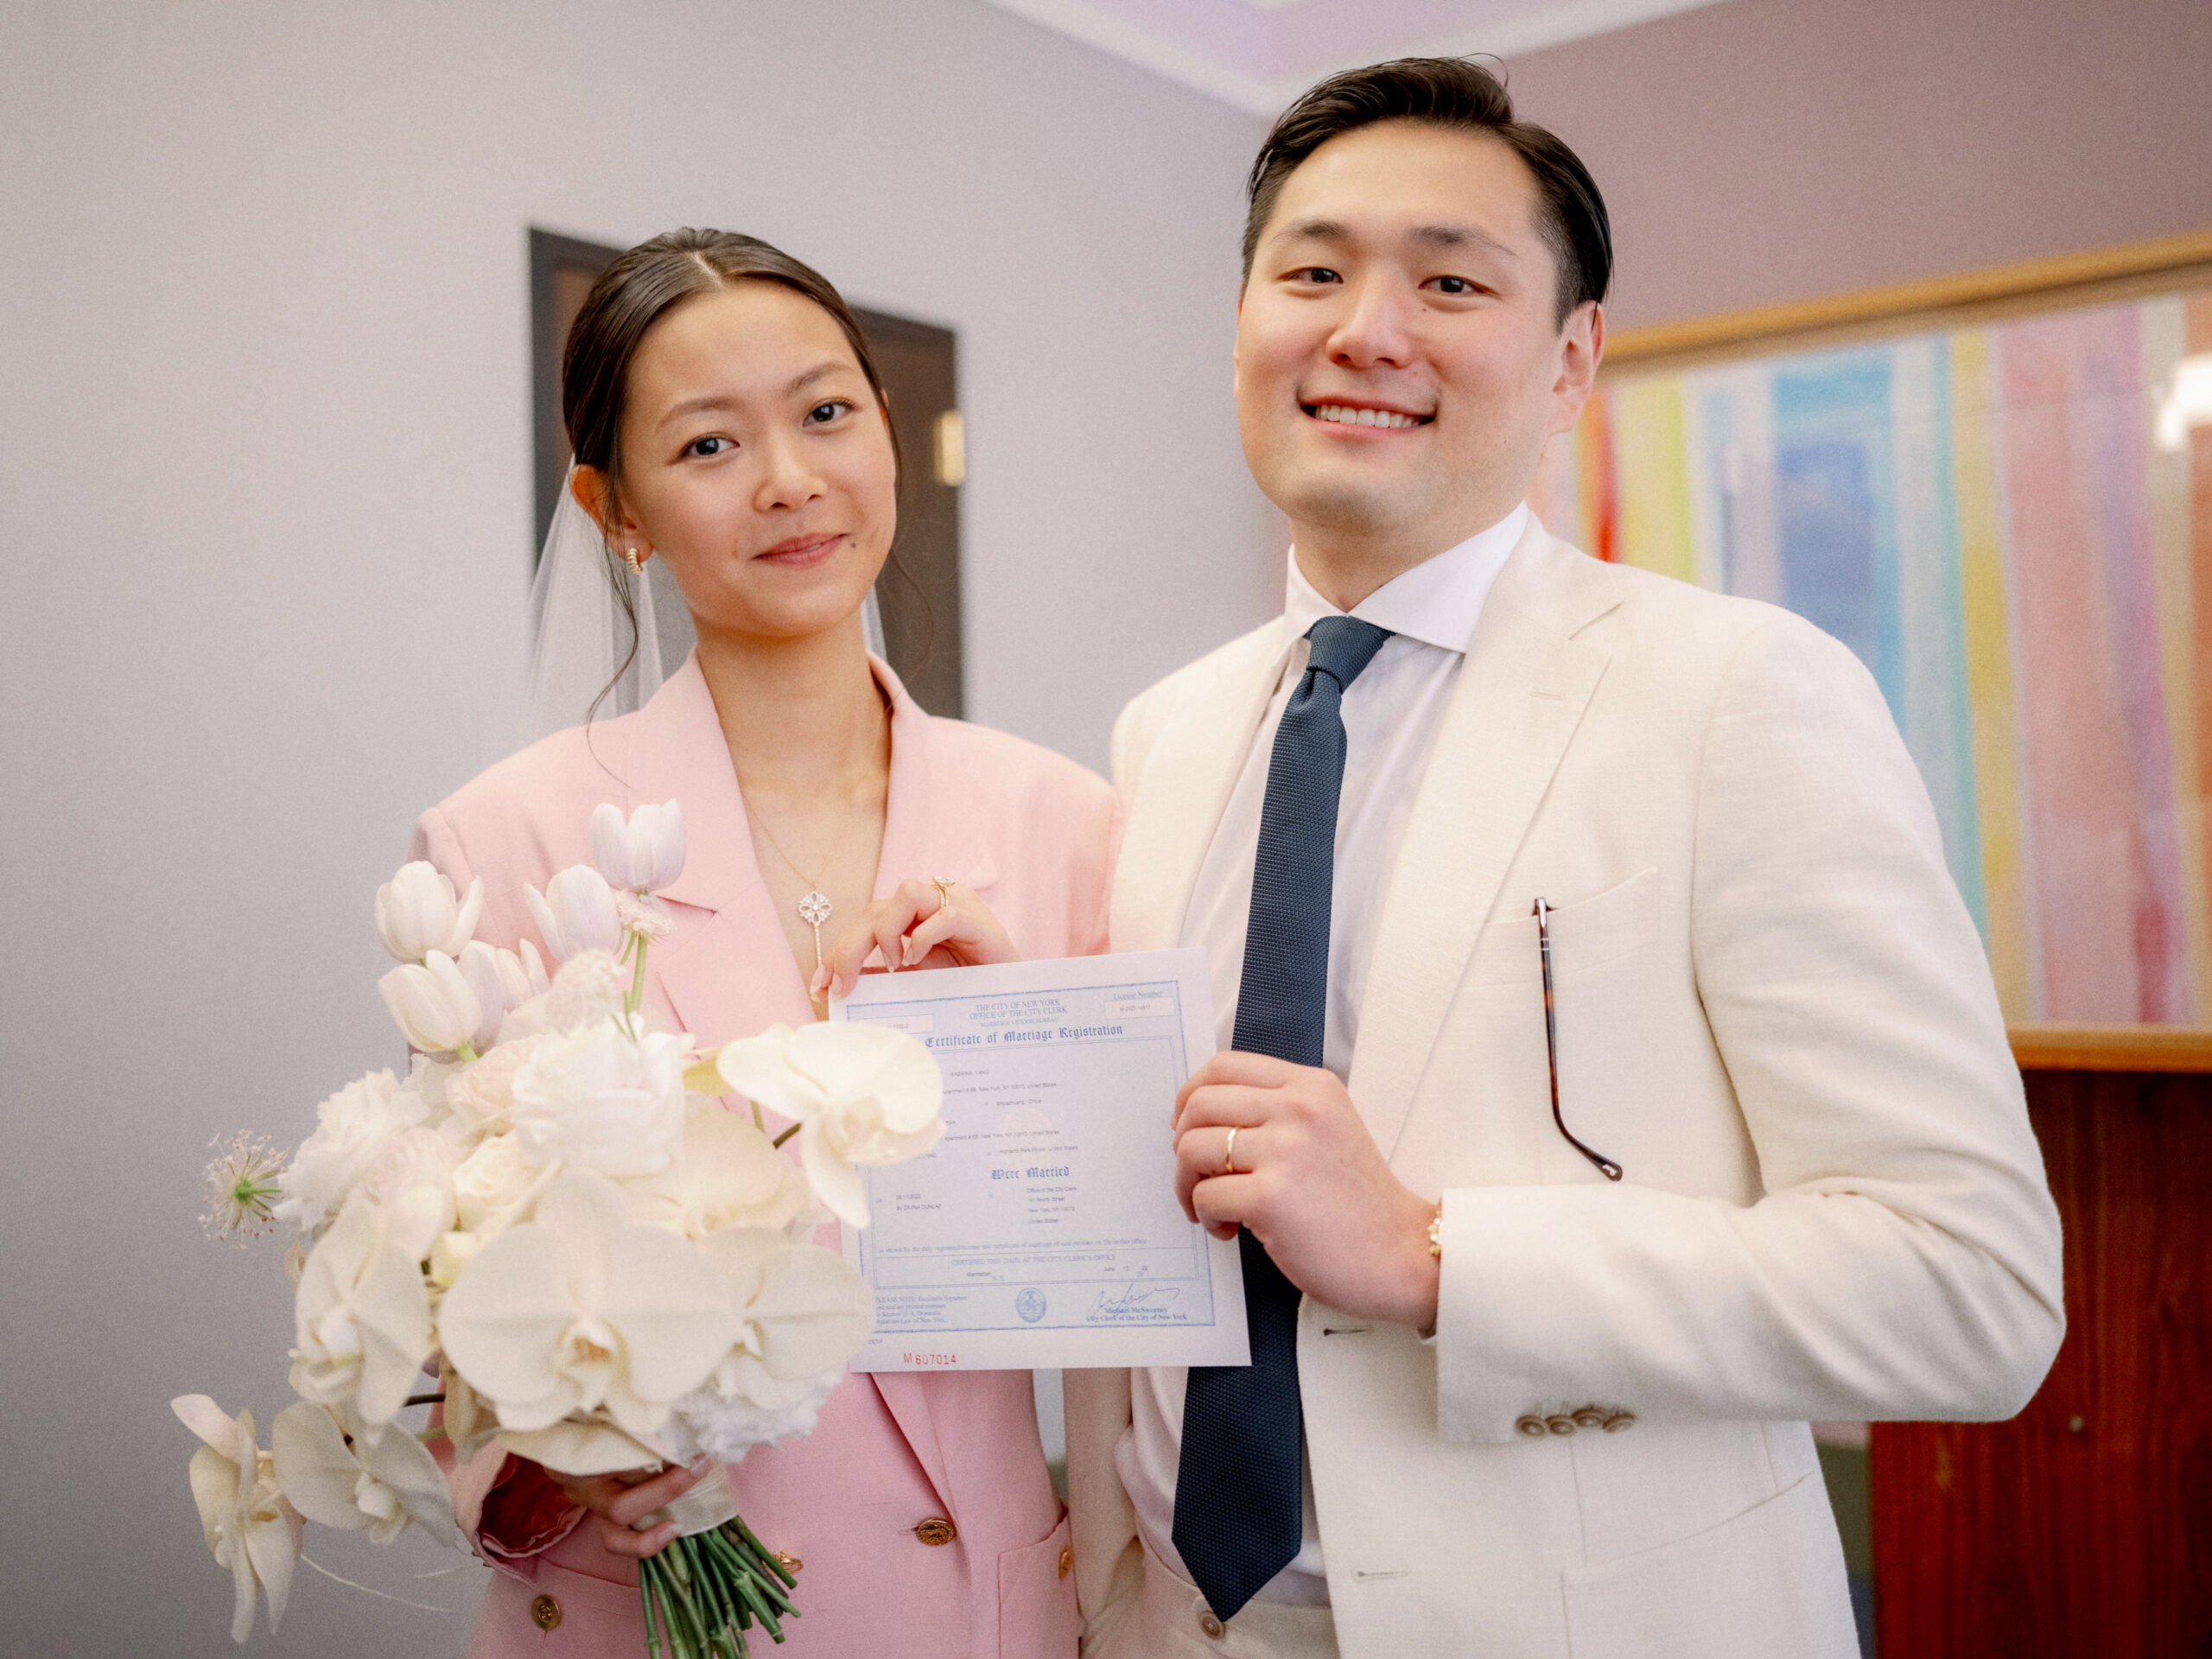 The newlyweds are holding their marriage certificate. Documentary Wedding Photography Image by Jenny Fu Studio